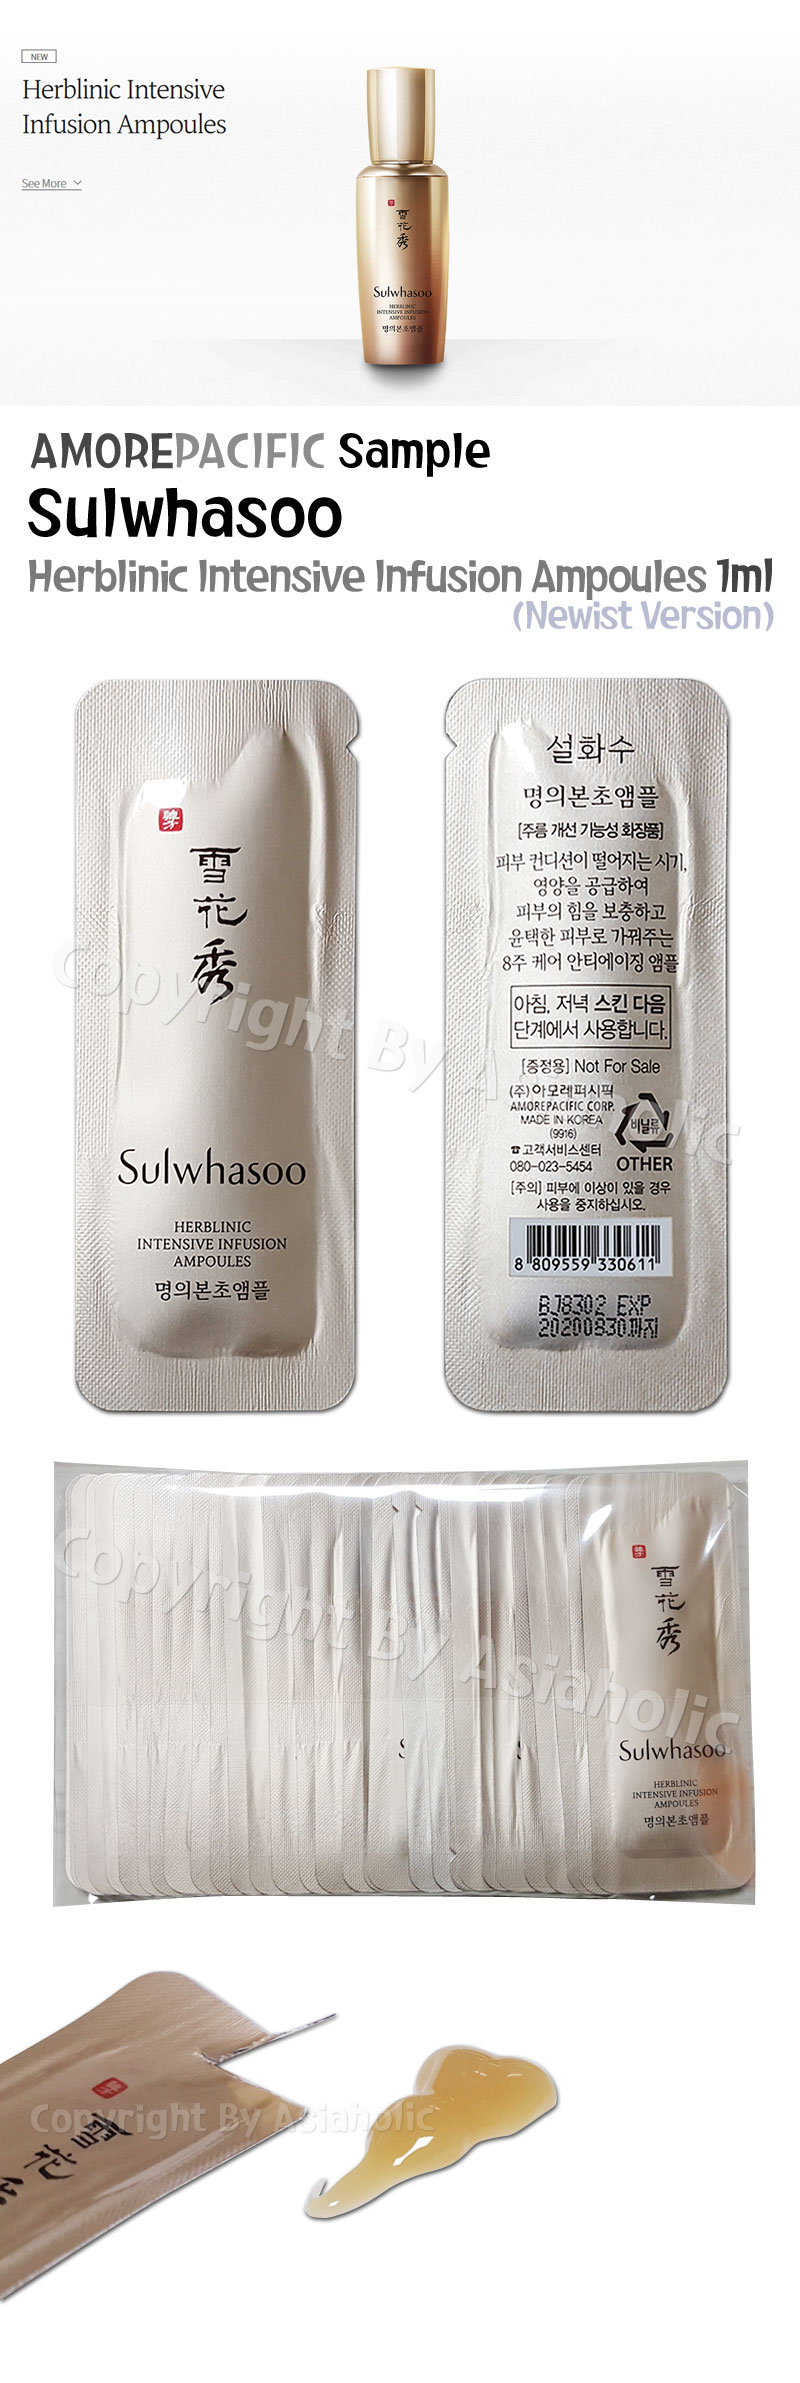 Sulwhasoo Herblinic Intensive Infusion Ampoules 1ml x 90pcs (90ml) Sample Newist Version